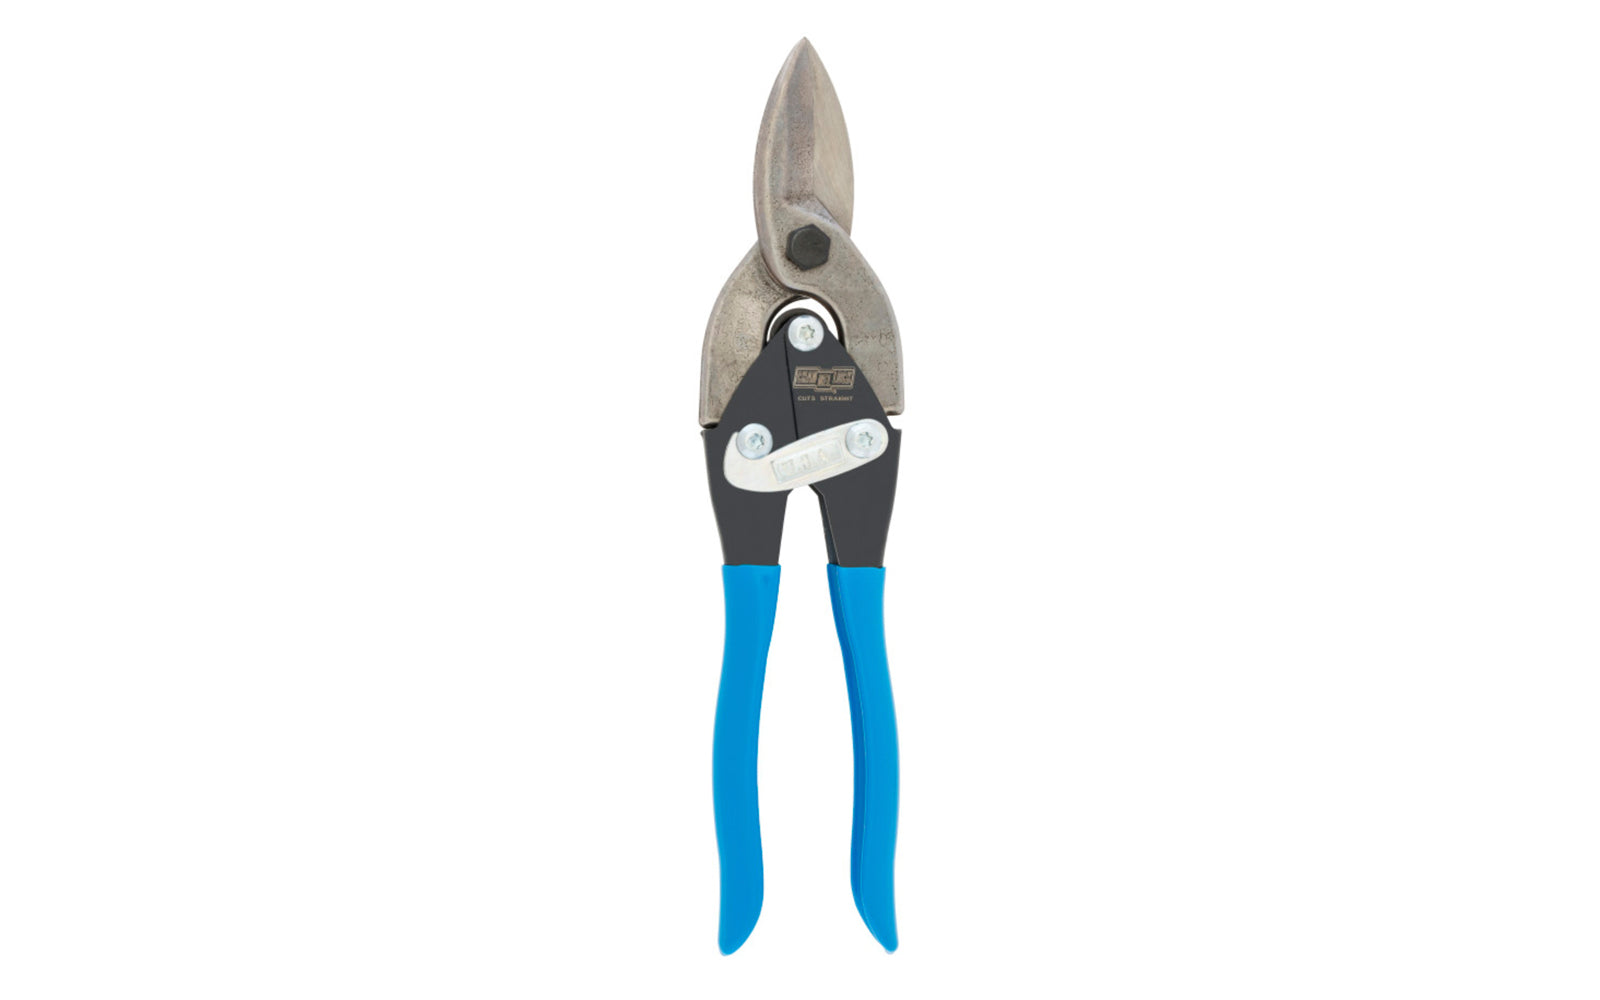 These 10" Channellock Utility Snips are great for making quick & easy cuts through thin materials. Easily cut curves, straight & trim cuts through 24 ga cold rolled steel, vinyl, plastic, and rubber. The blades are forged from molybdenum alloy steel for durability & strength. Channelock Model 610SS.  Made in USA.